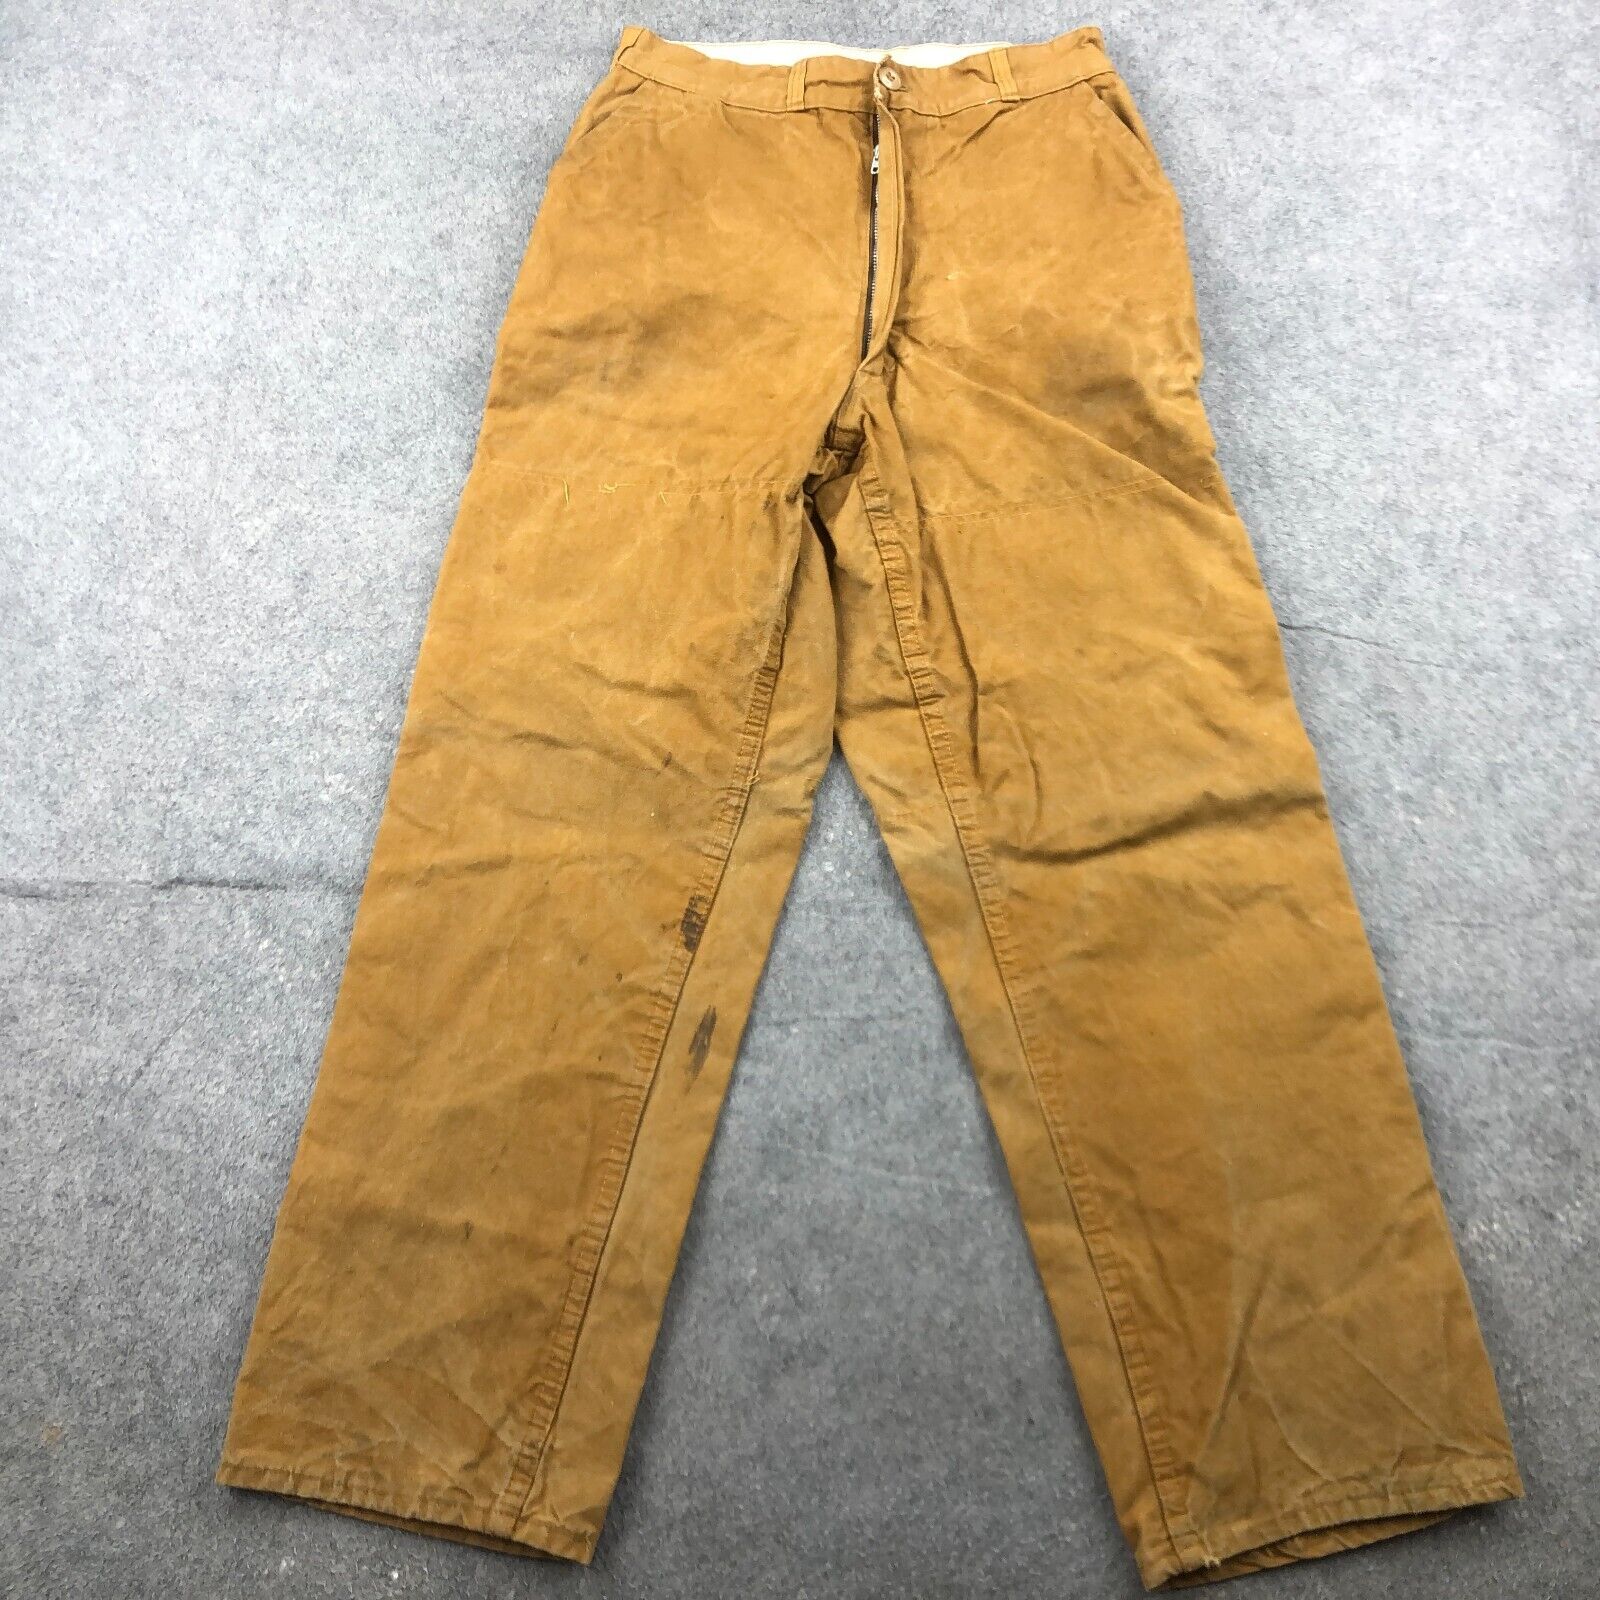 Vintage Canvasback Pants Men\'s 28x28 Duck Brown Outdoors Brush Hunting *